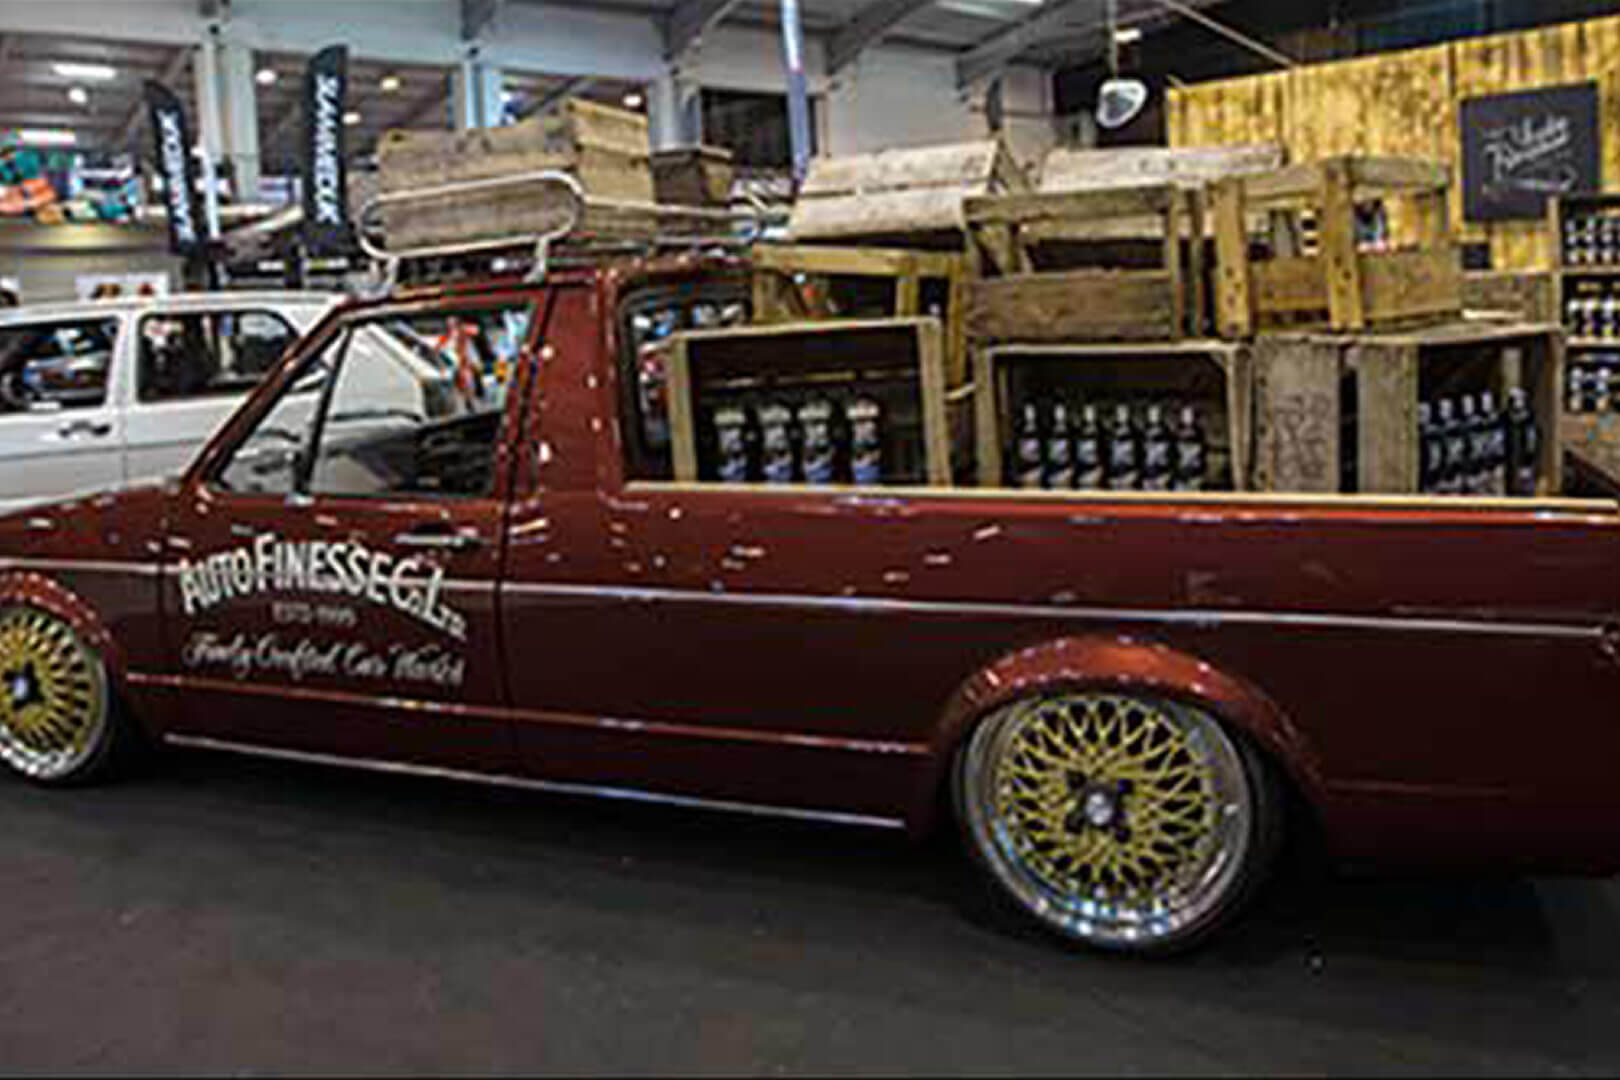 Ultimate Dubs in an Auto Finesse Bottle image